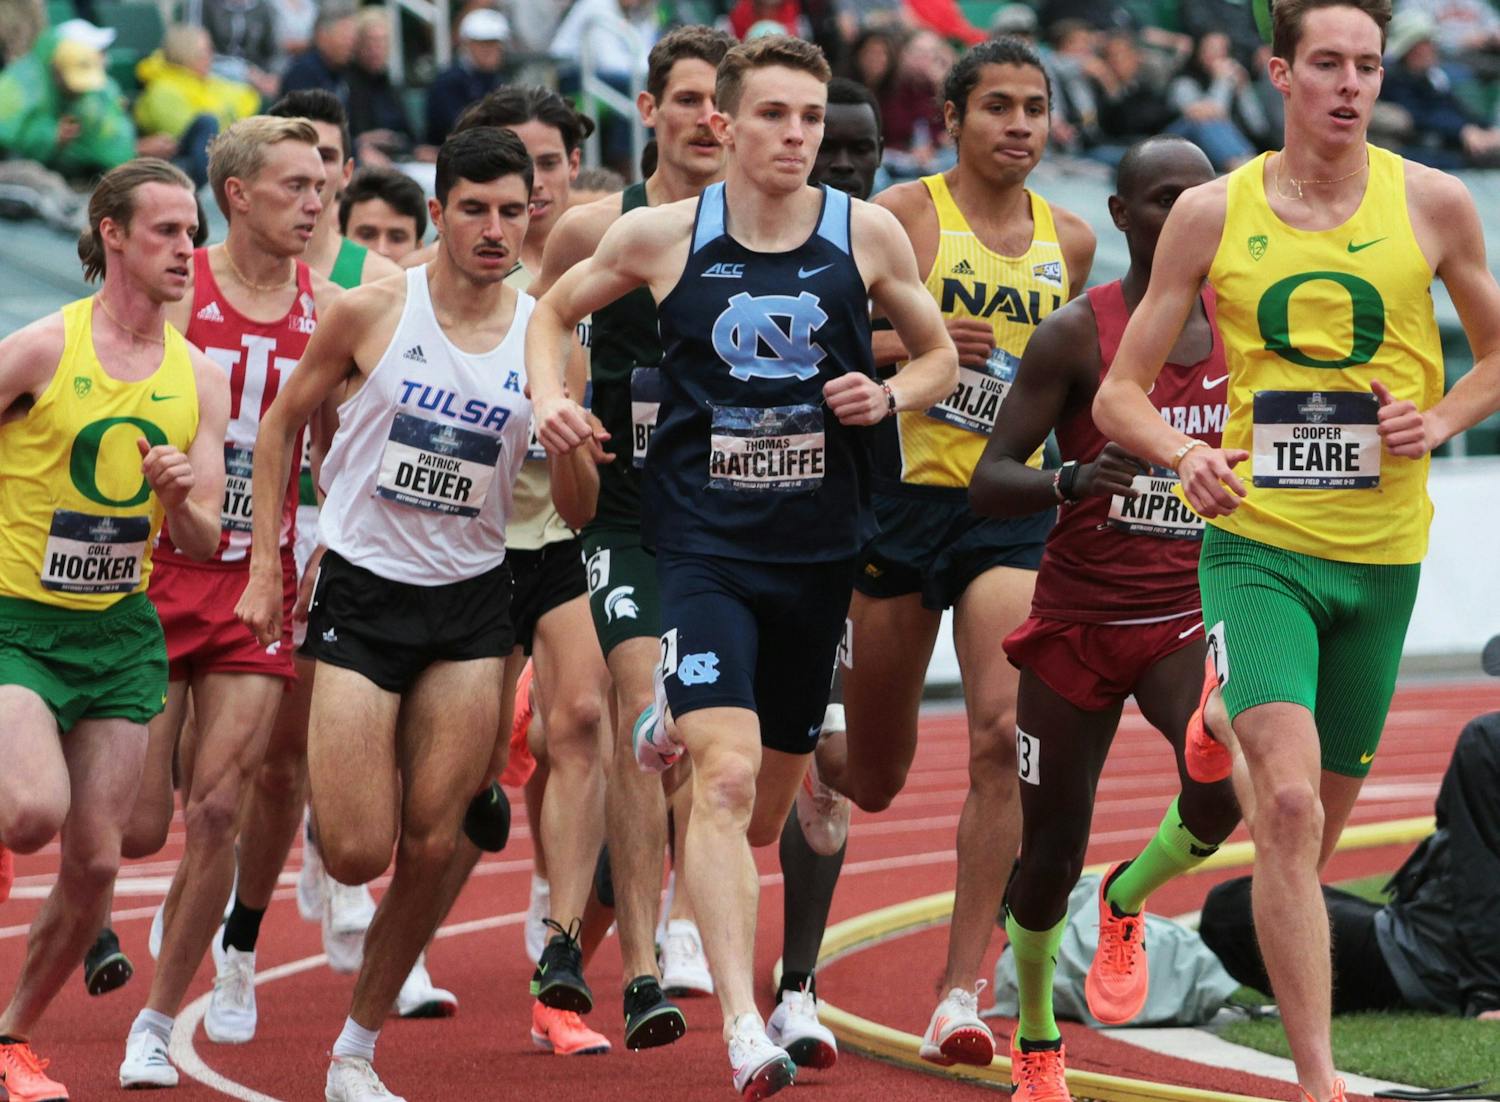 UNC TRACK AND FIELD 